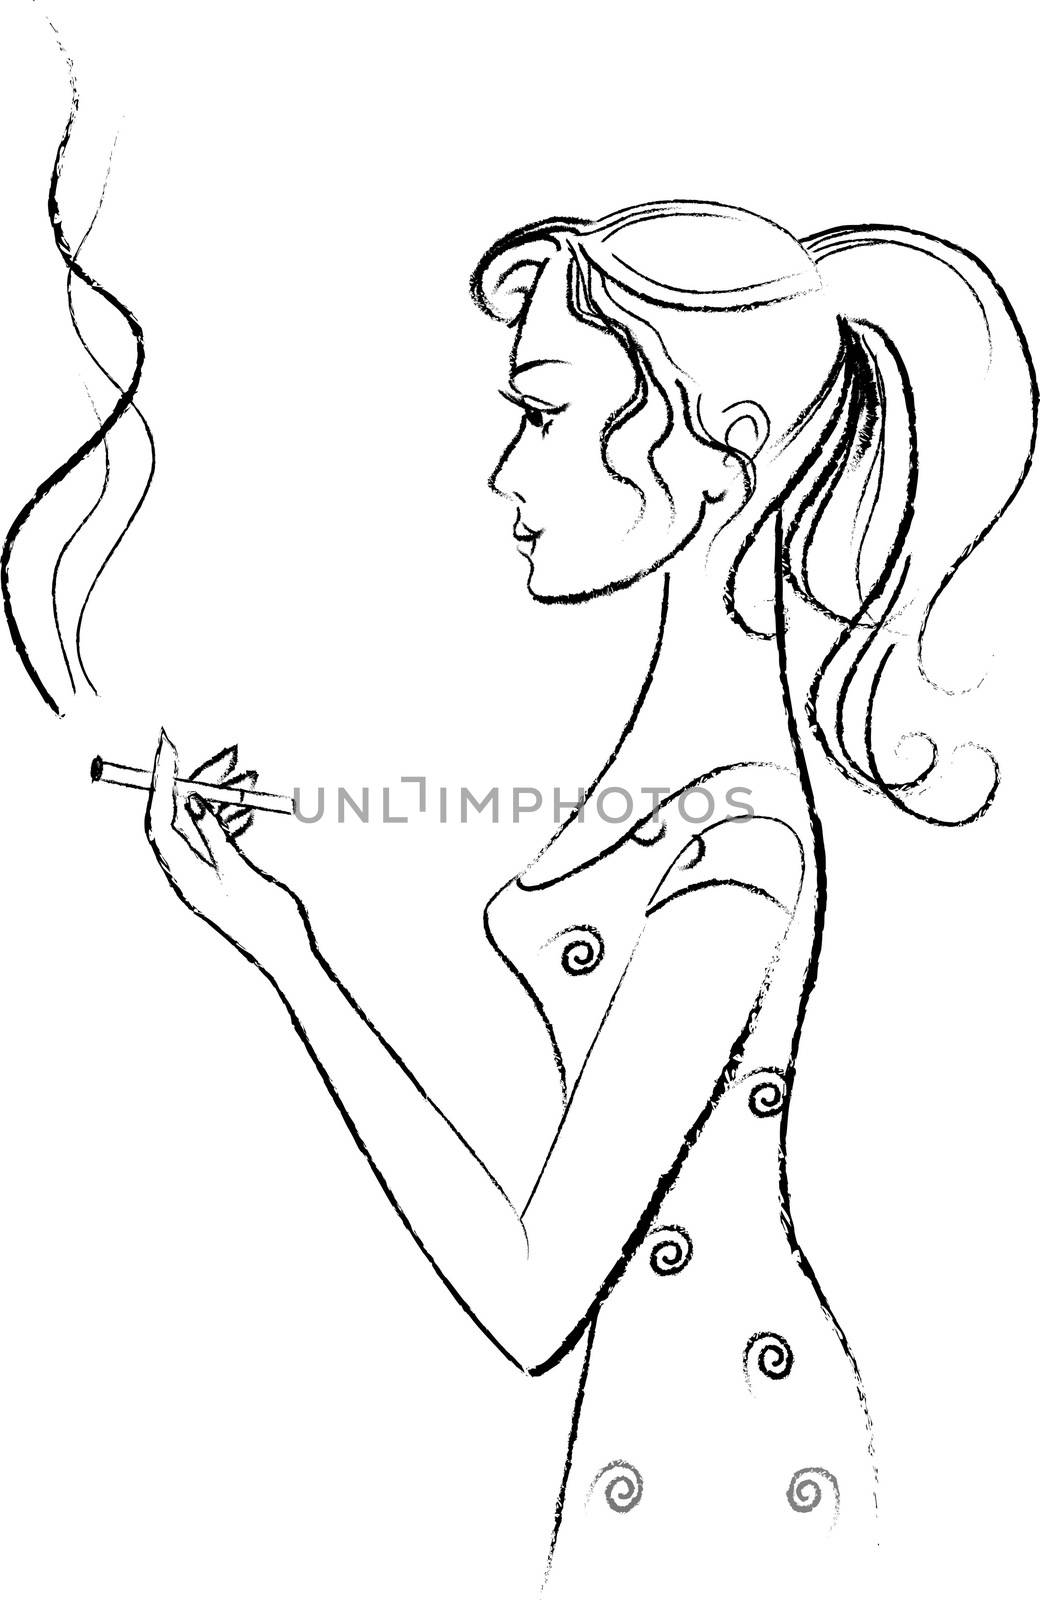 the figure of a smoking girl on a white background